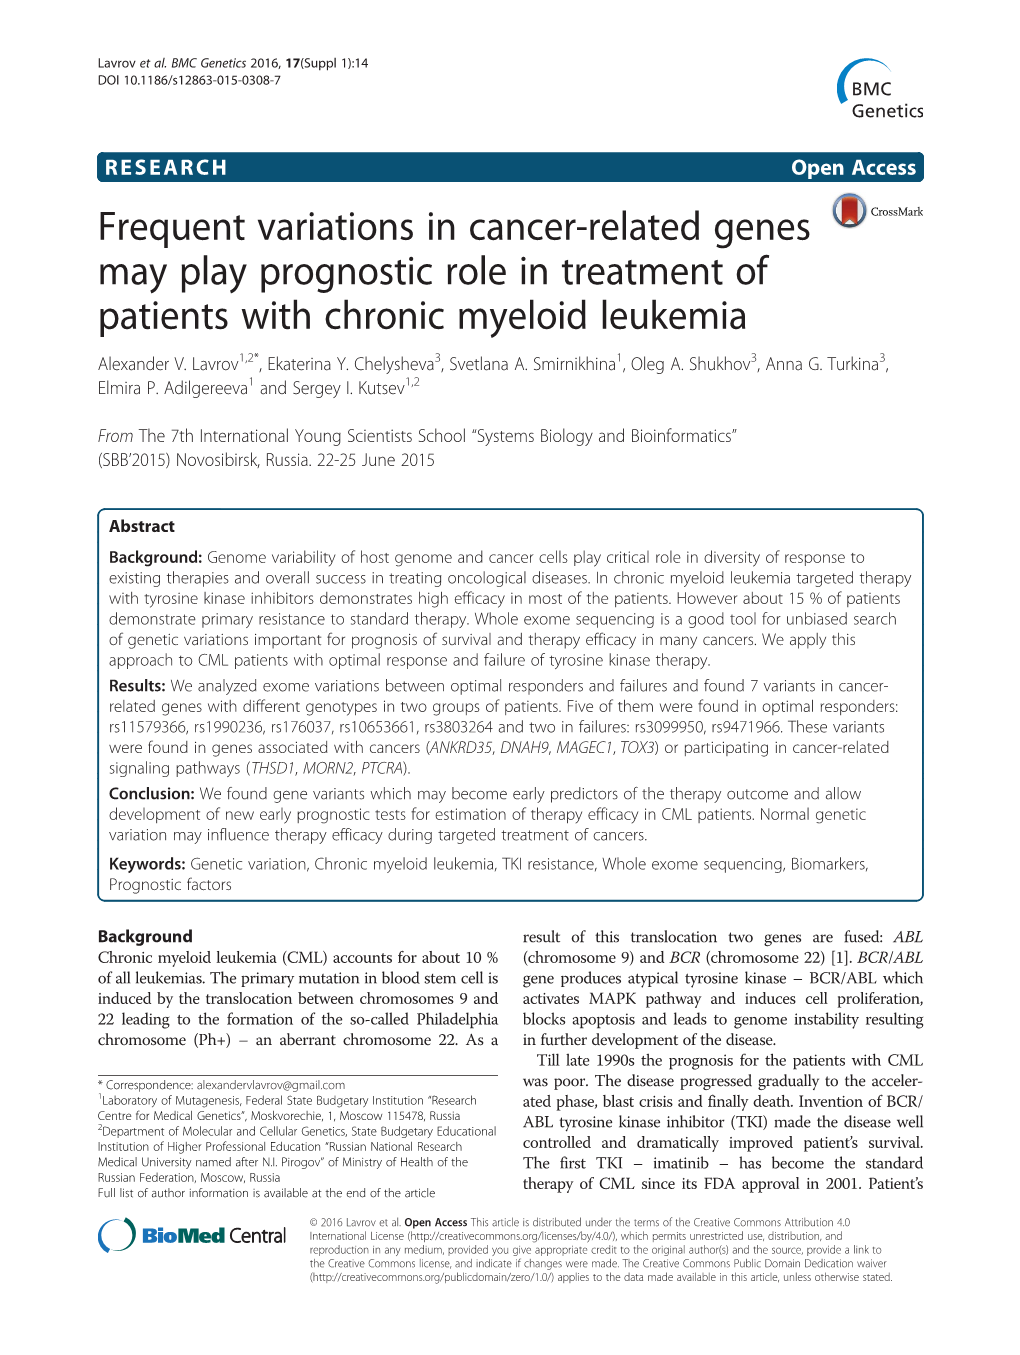 Frequent Variations in Cancer-Related Genes May Play Prognostic Role in Treatment of Patients with Chronic Myeloid Leukemia Alexander V